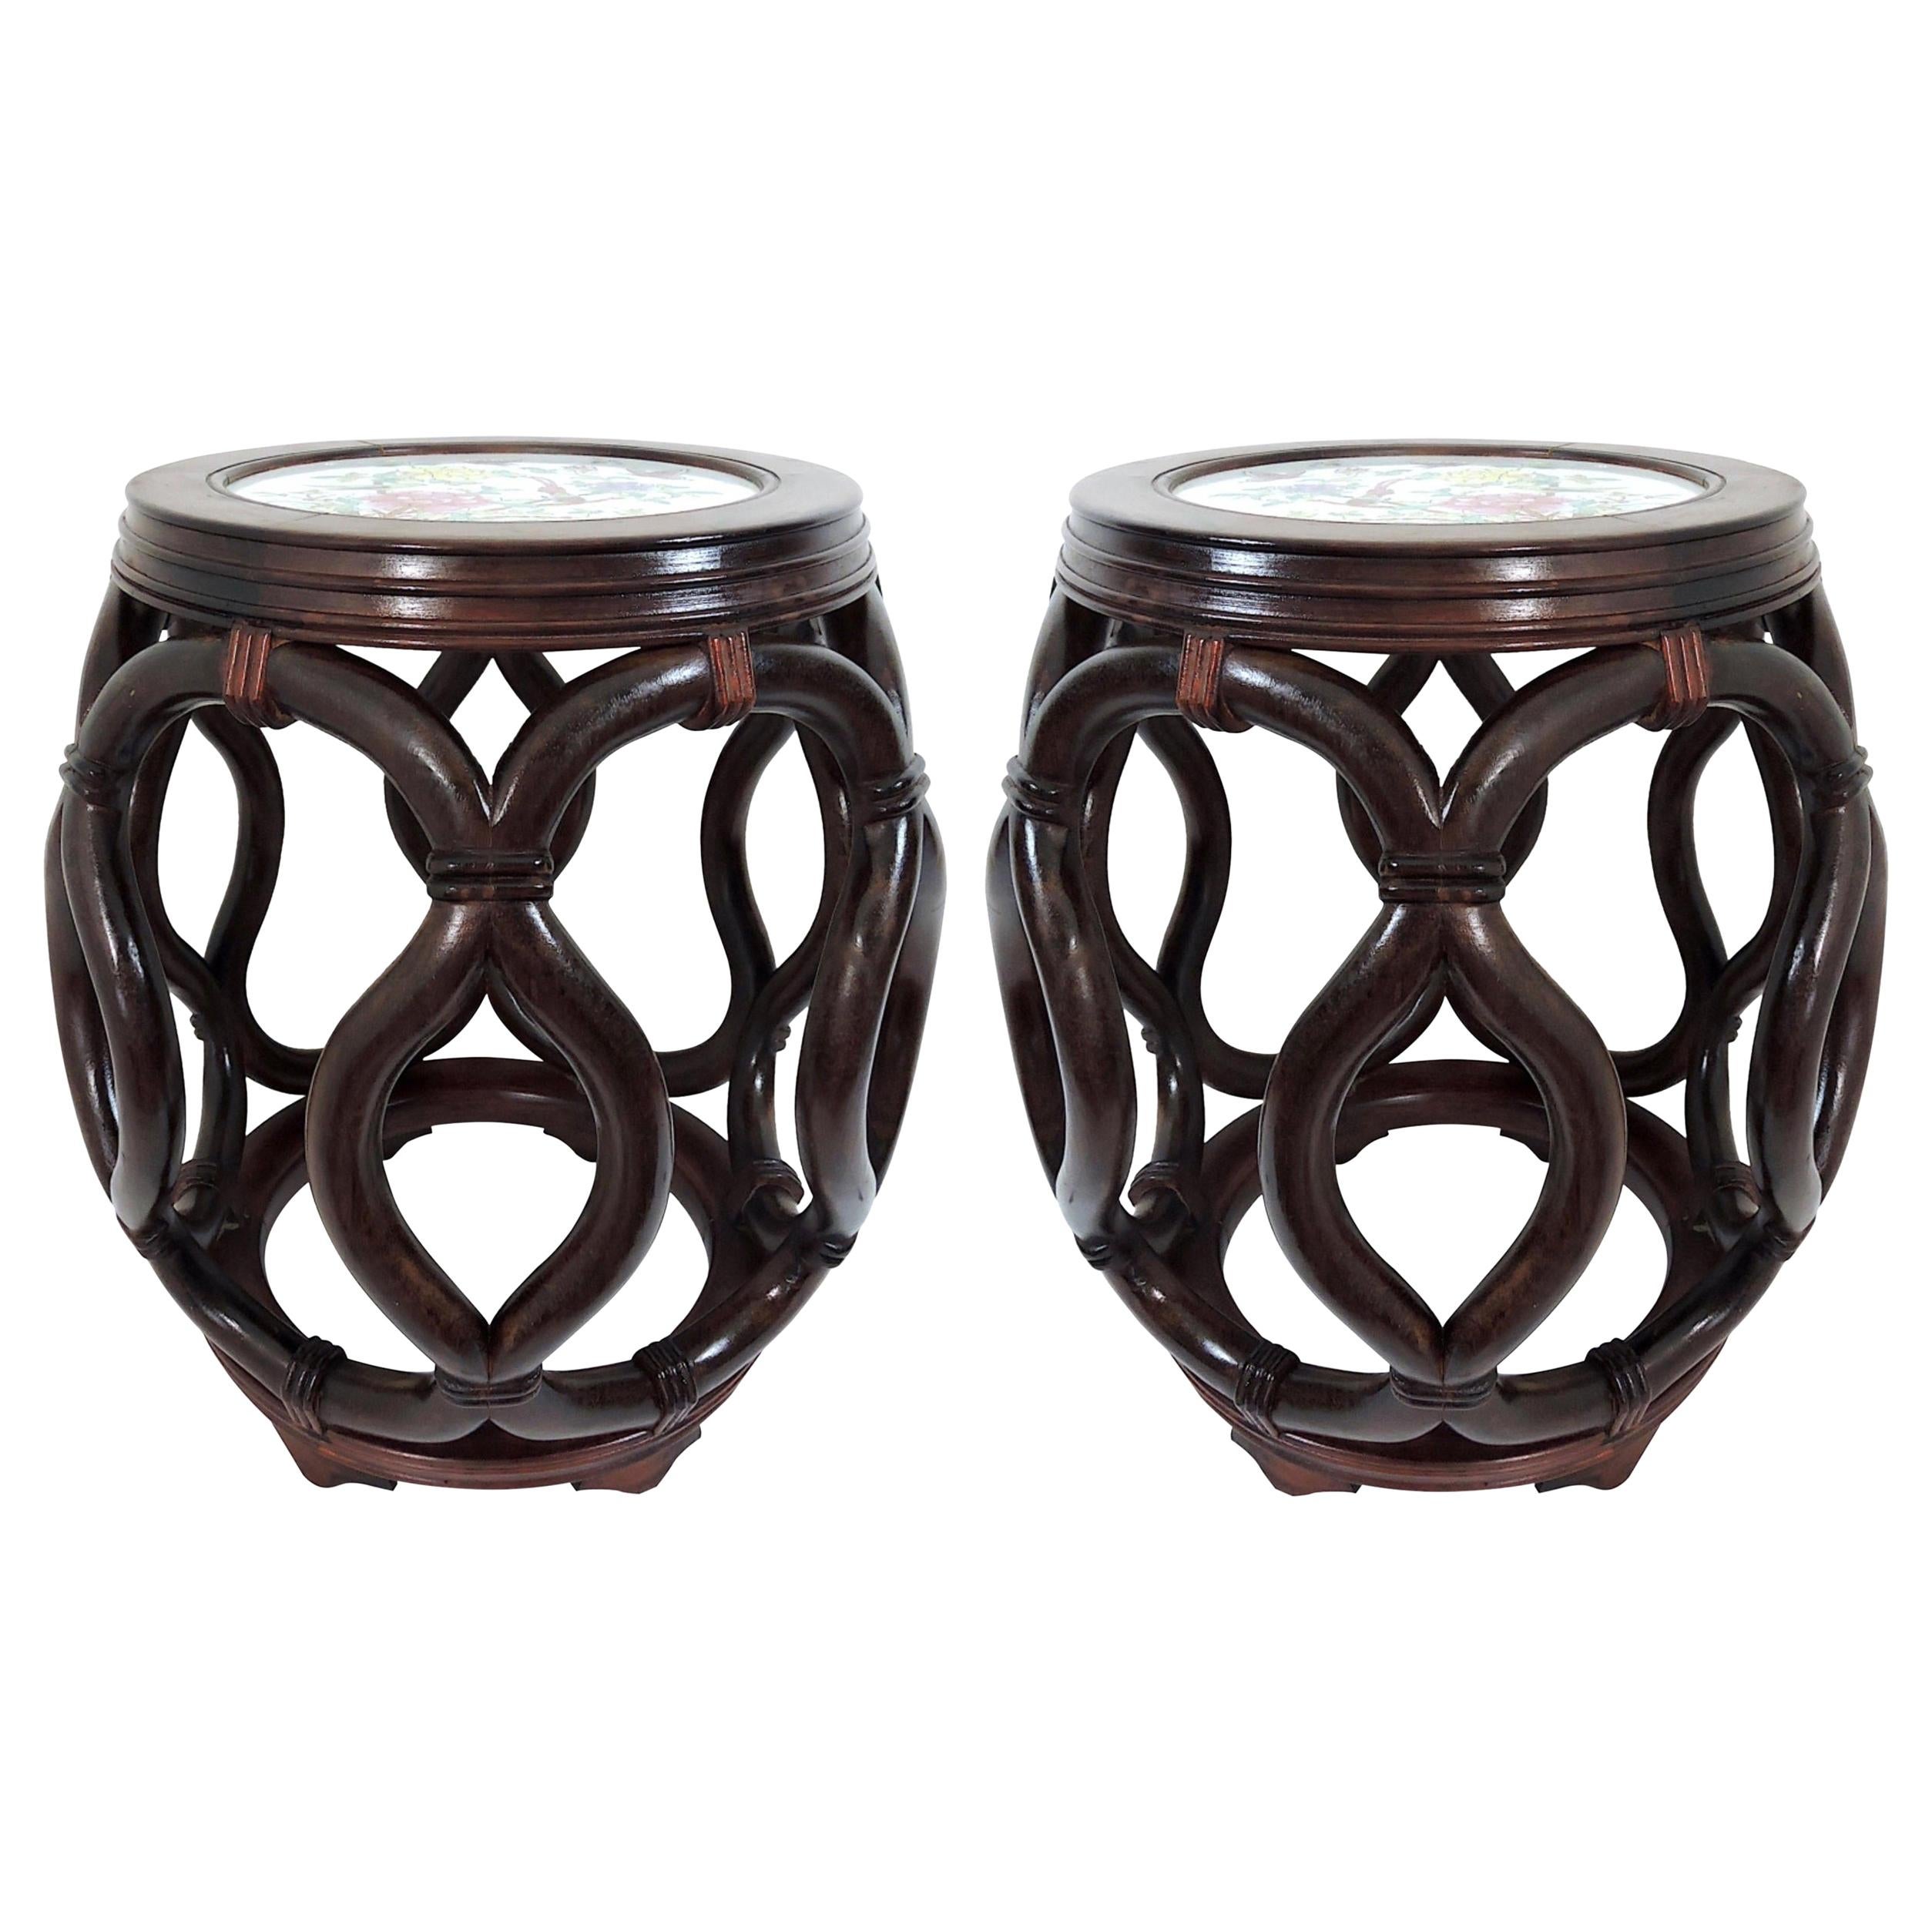 Matched Pair of Asian Rosewood Porcelain Top Garden Seats by George Zee